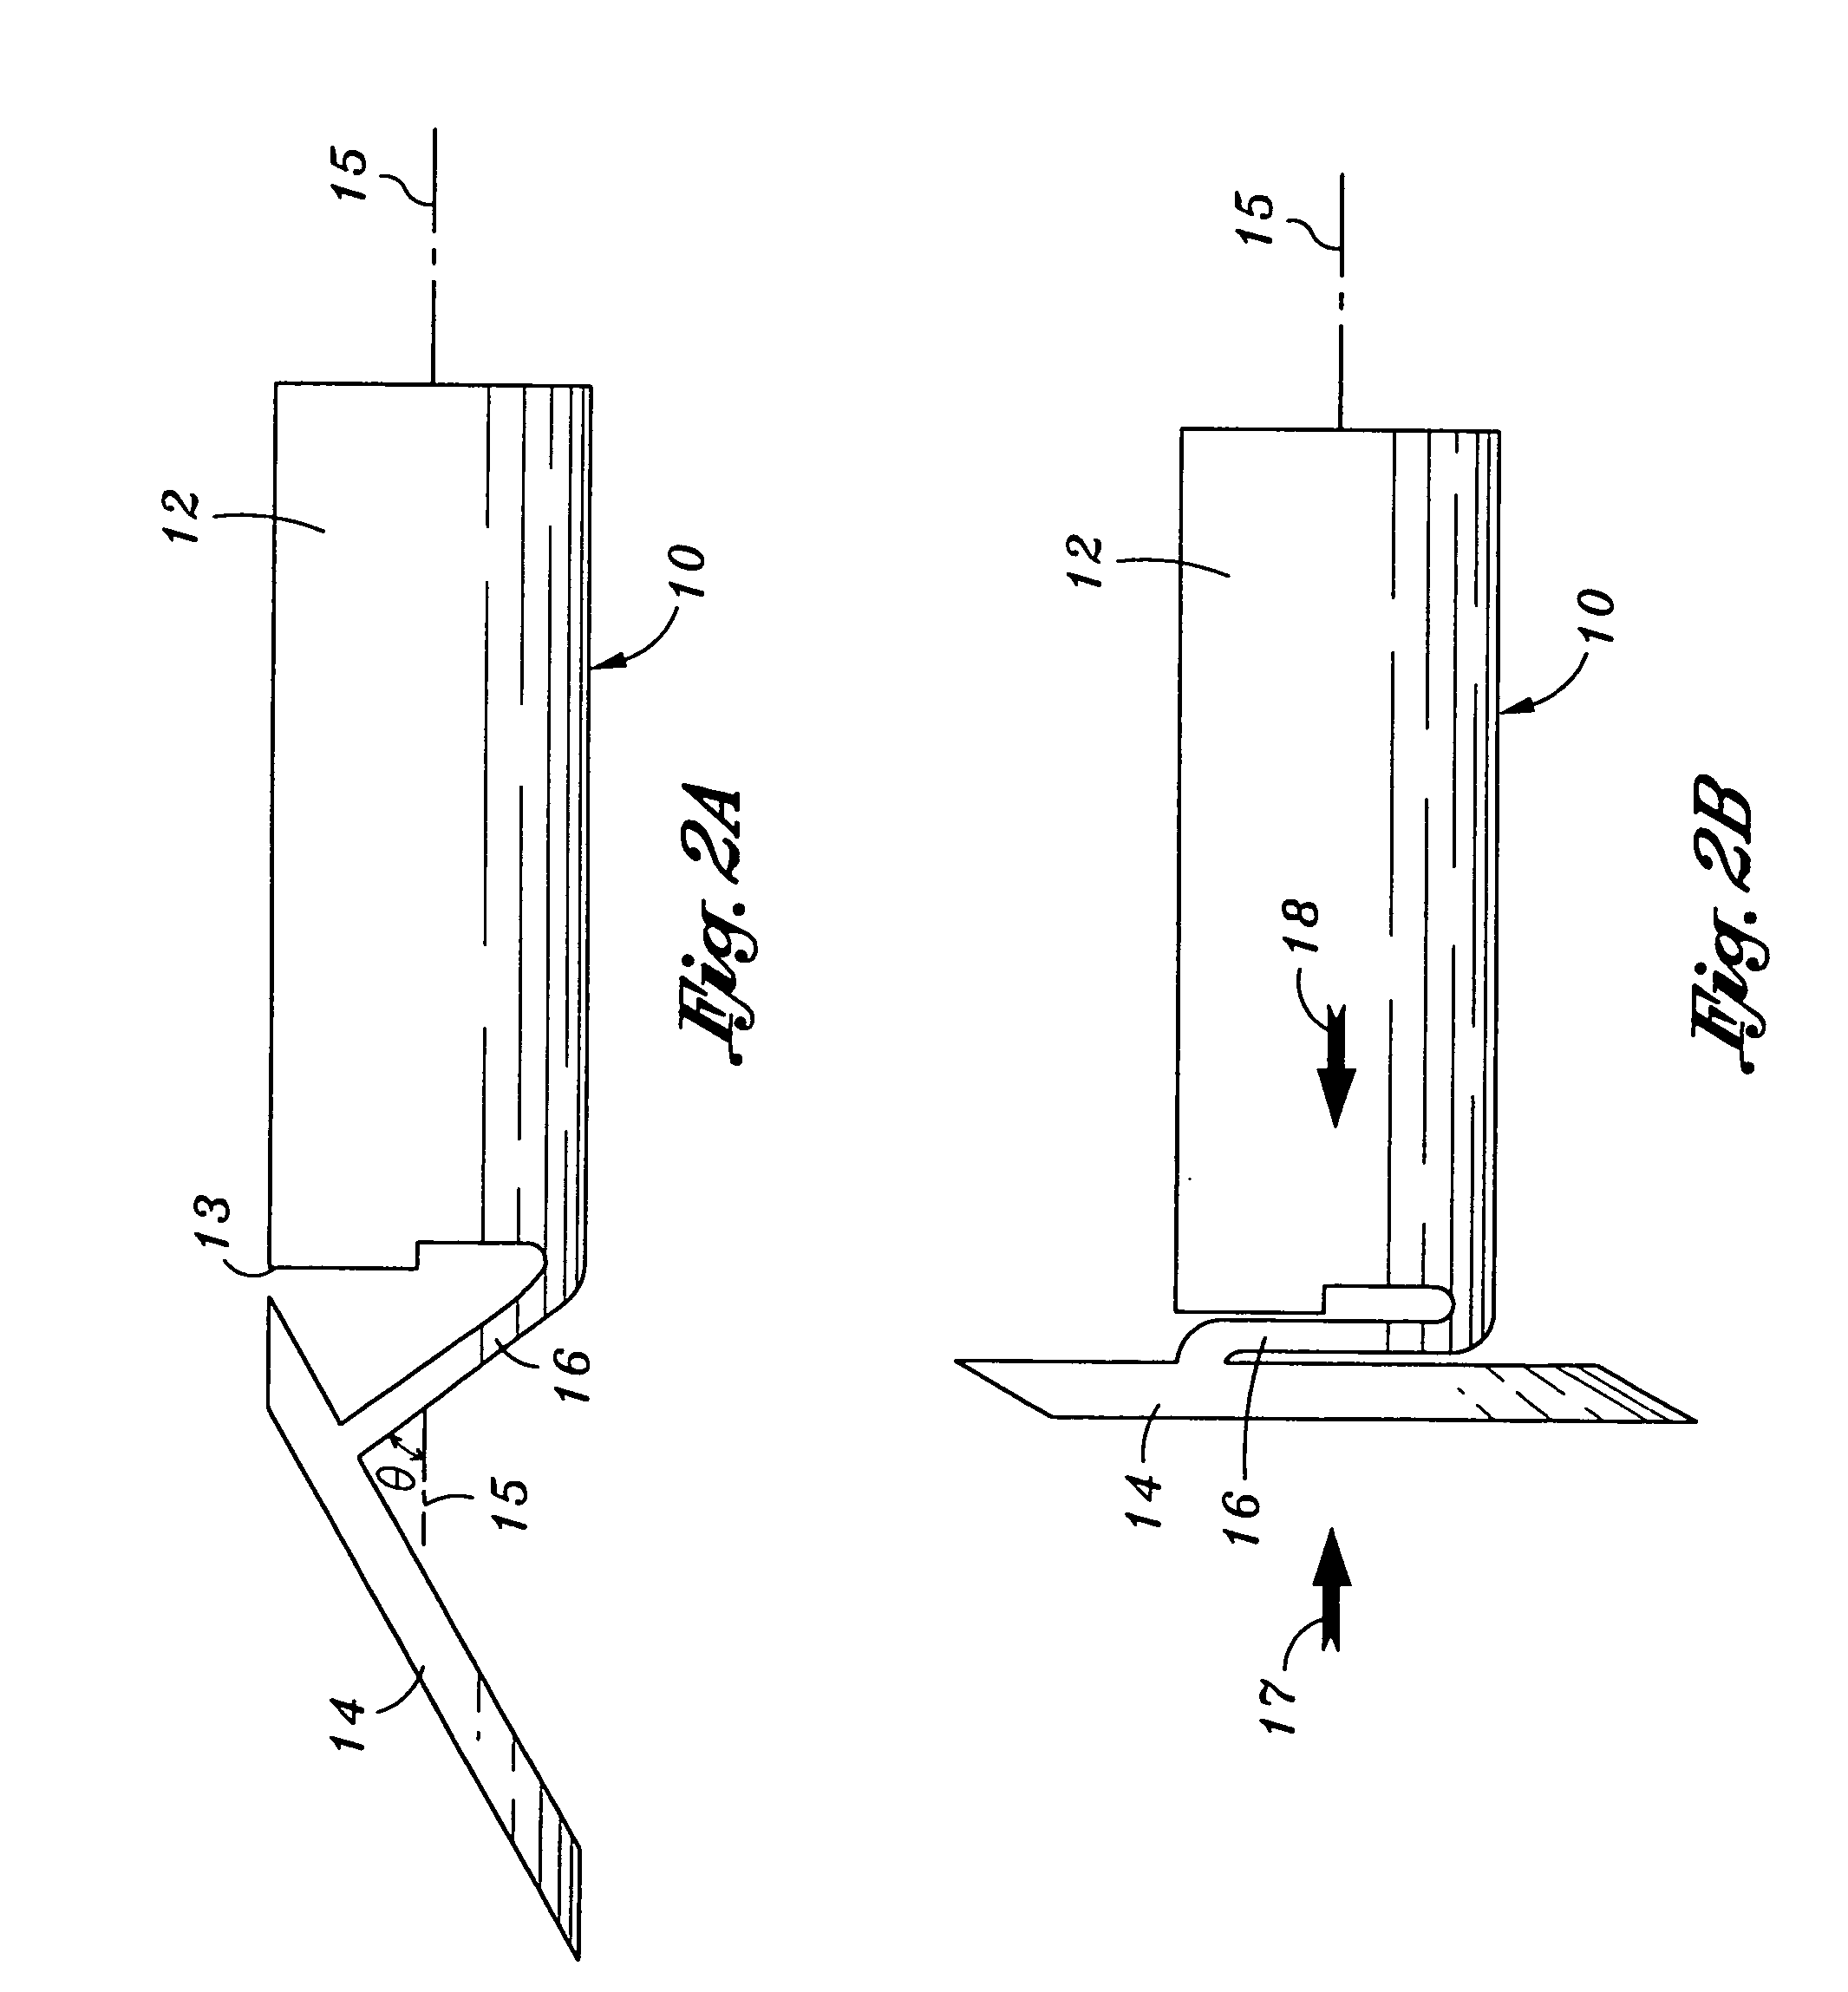 Bone anchor device having toggle member for attaching connective tissues to bone